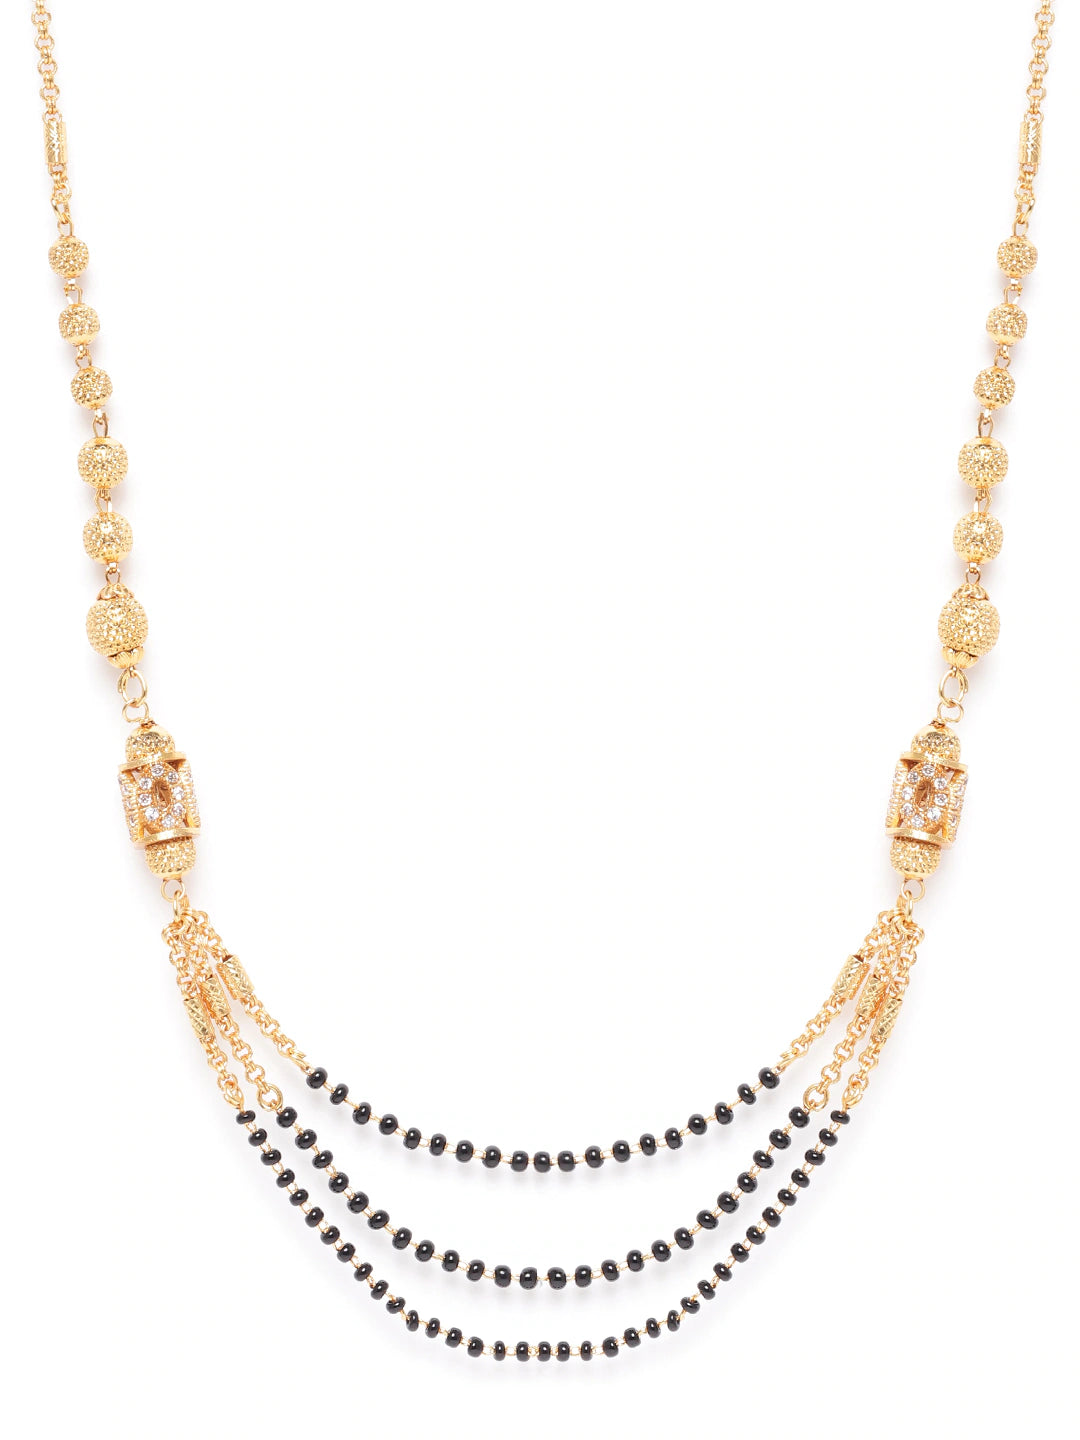 Black Gold-Plated AD-Studded & Beaded Layered Mangalsutra